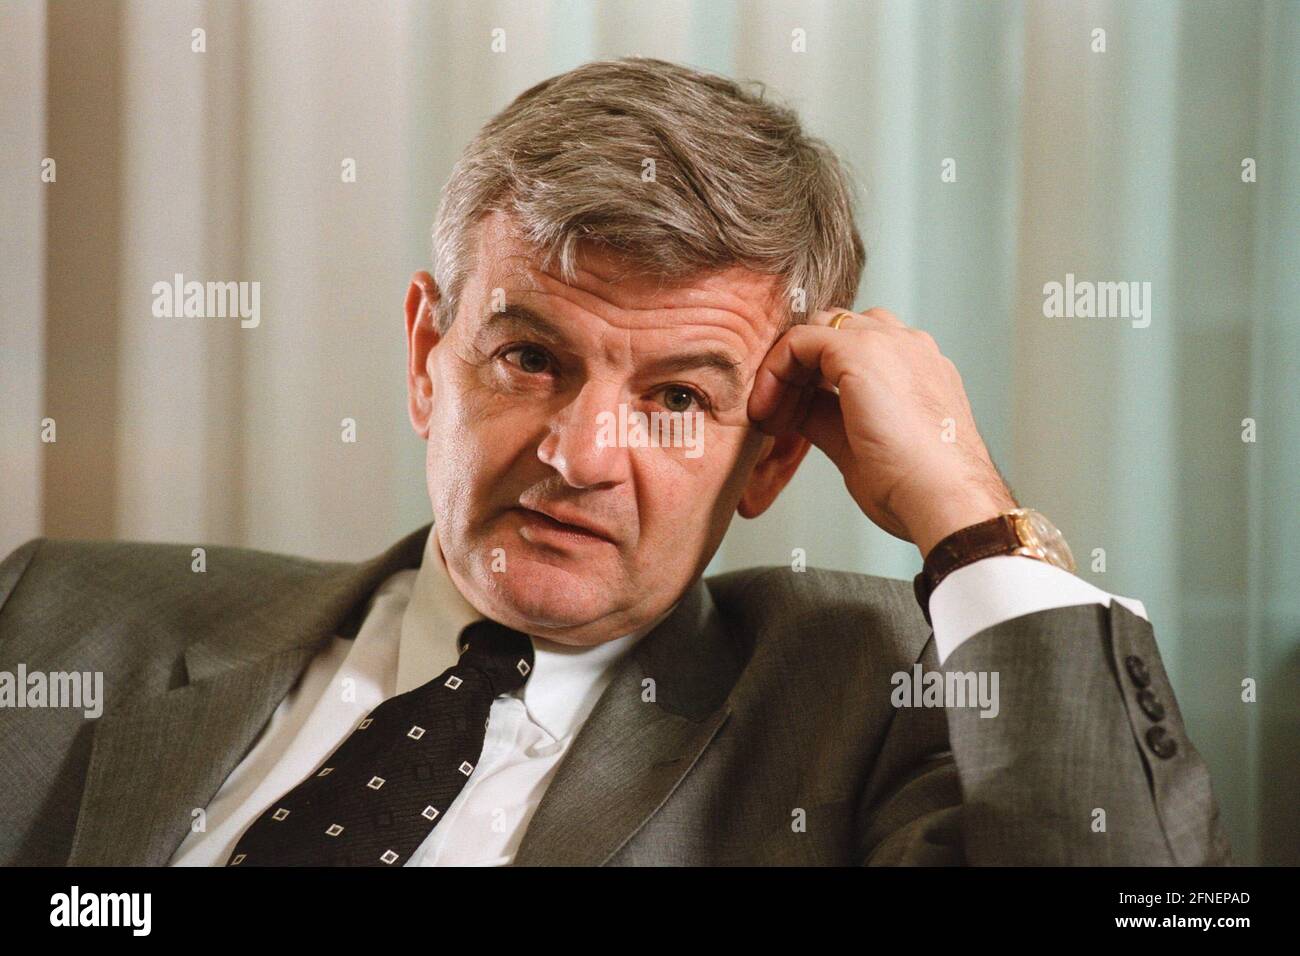 Portrait of Federal Foreign Minister Joschka Fischer (Bündnis 90/Die Grünen) during an interview in his Bonn office. [automated translation] Stock Photo